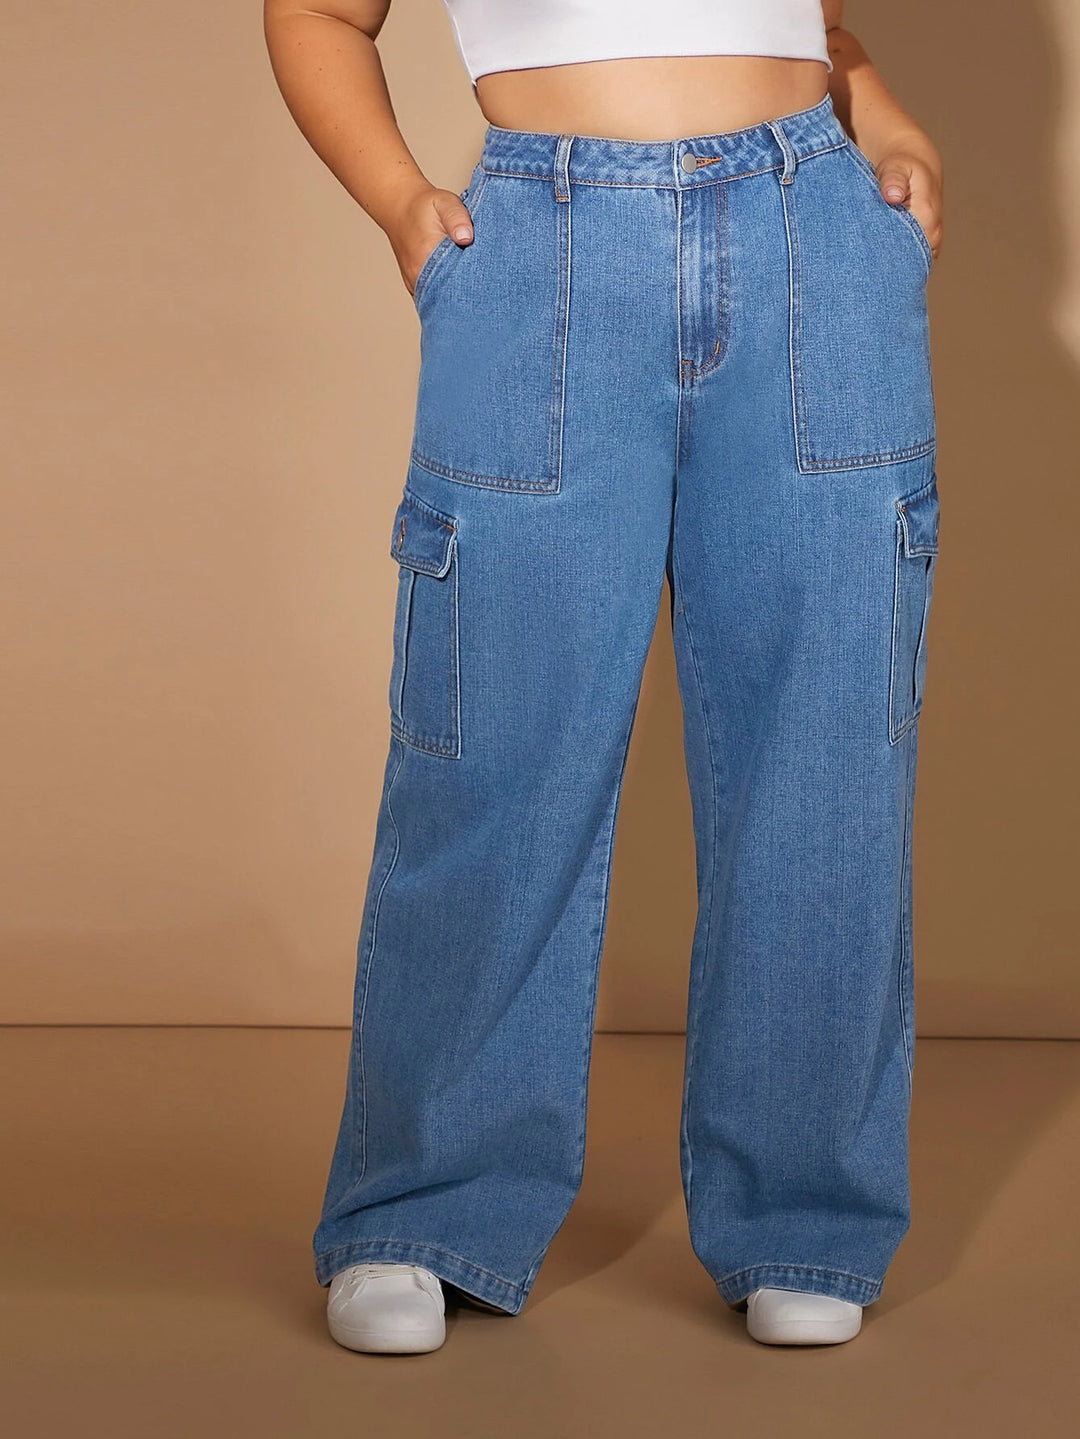 Cargo Jeans With Additional Flap Pocket Detail